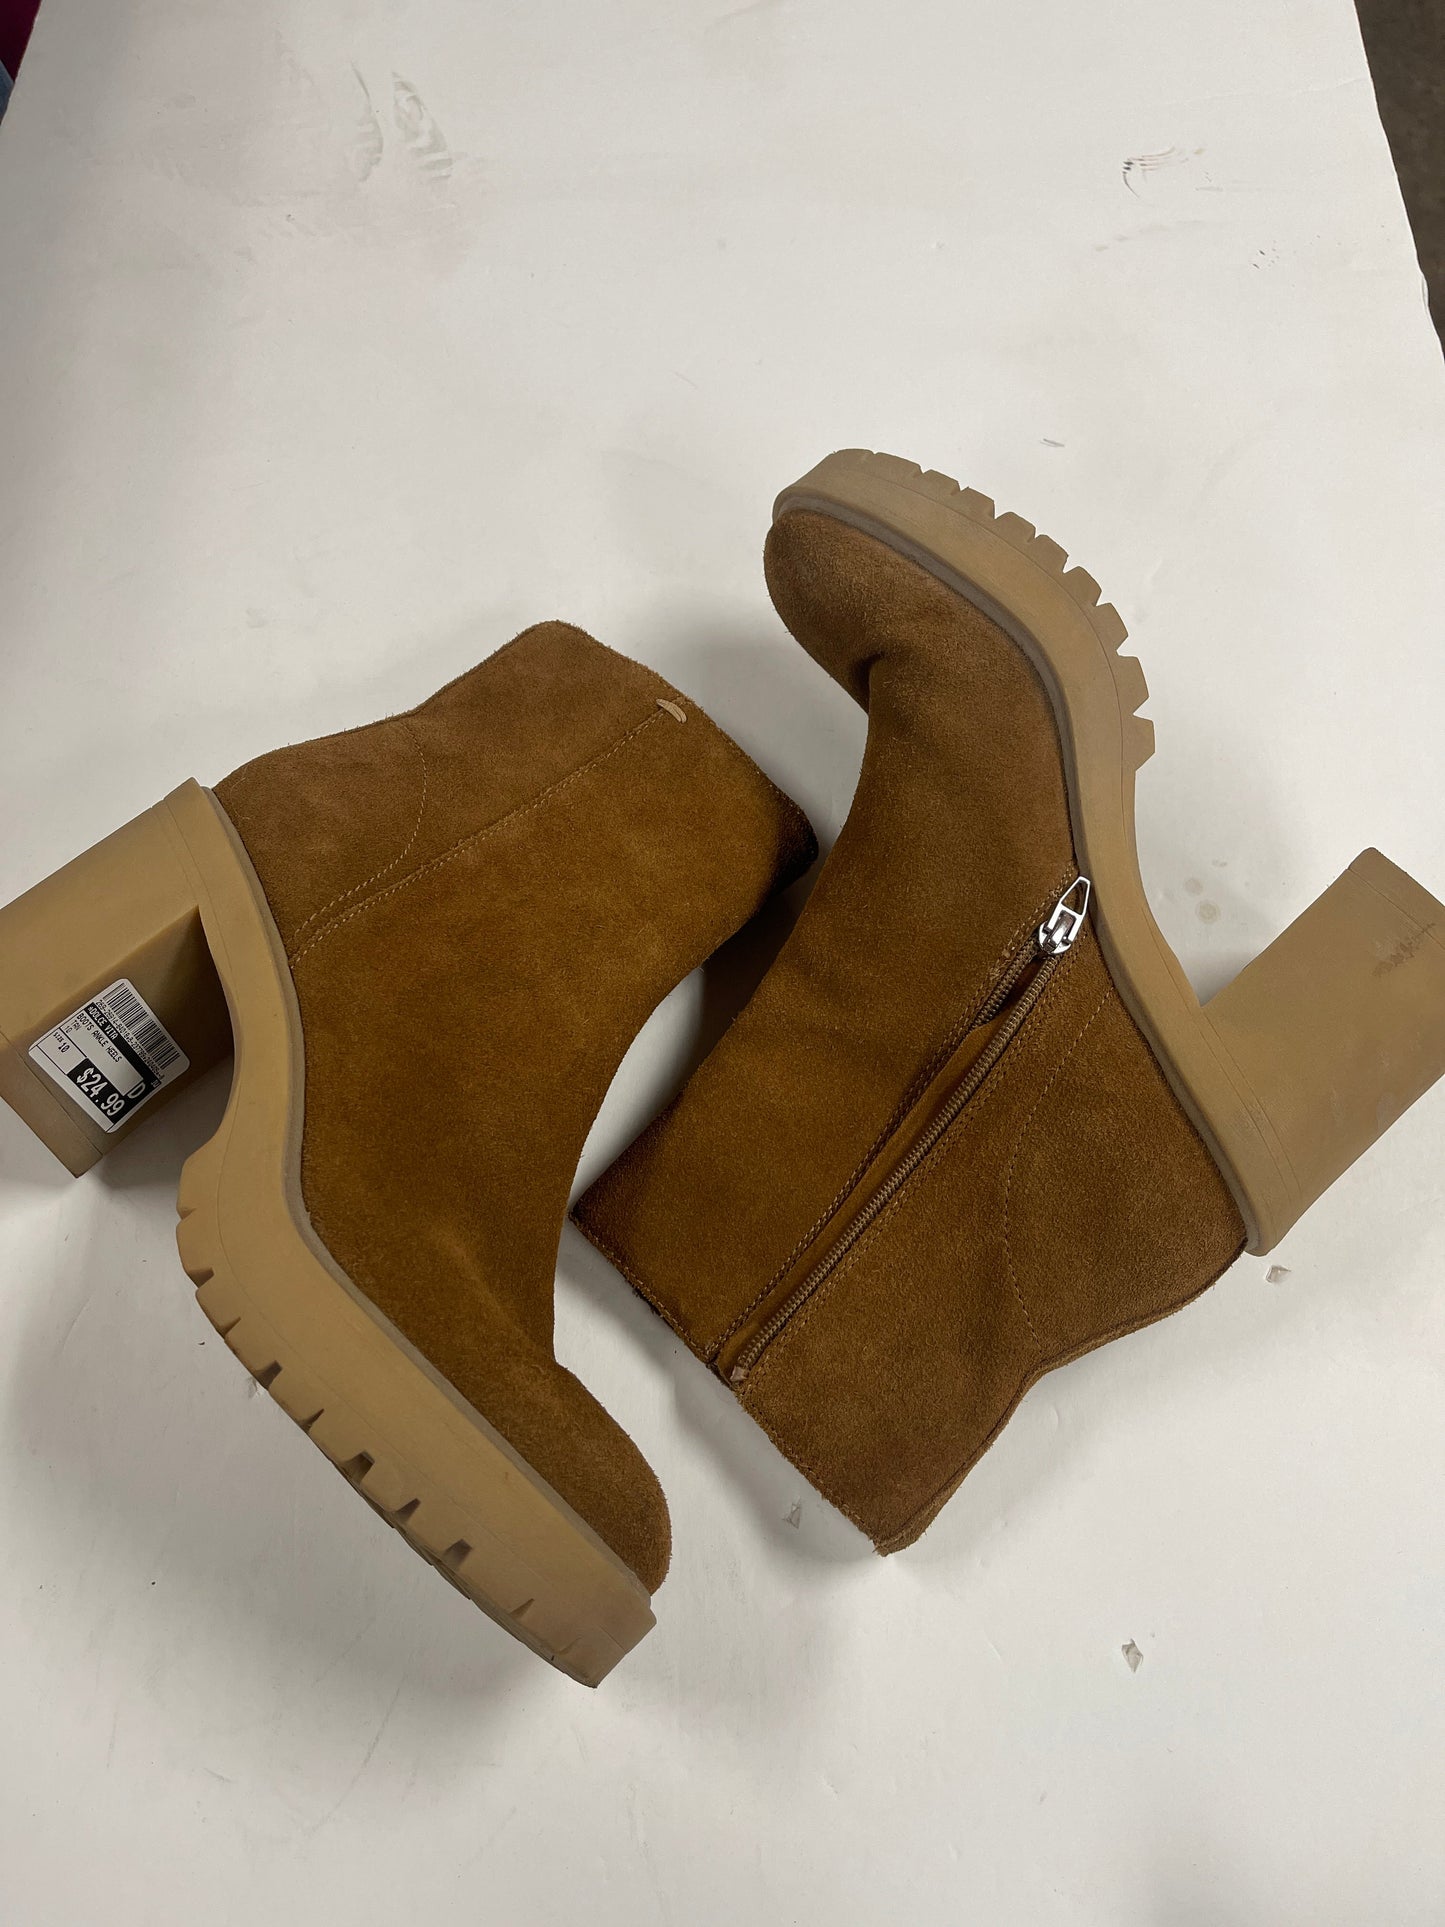 Tan Boots Ankle Heels Dolce Vita, Size 10